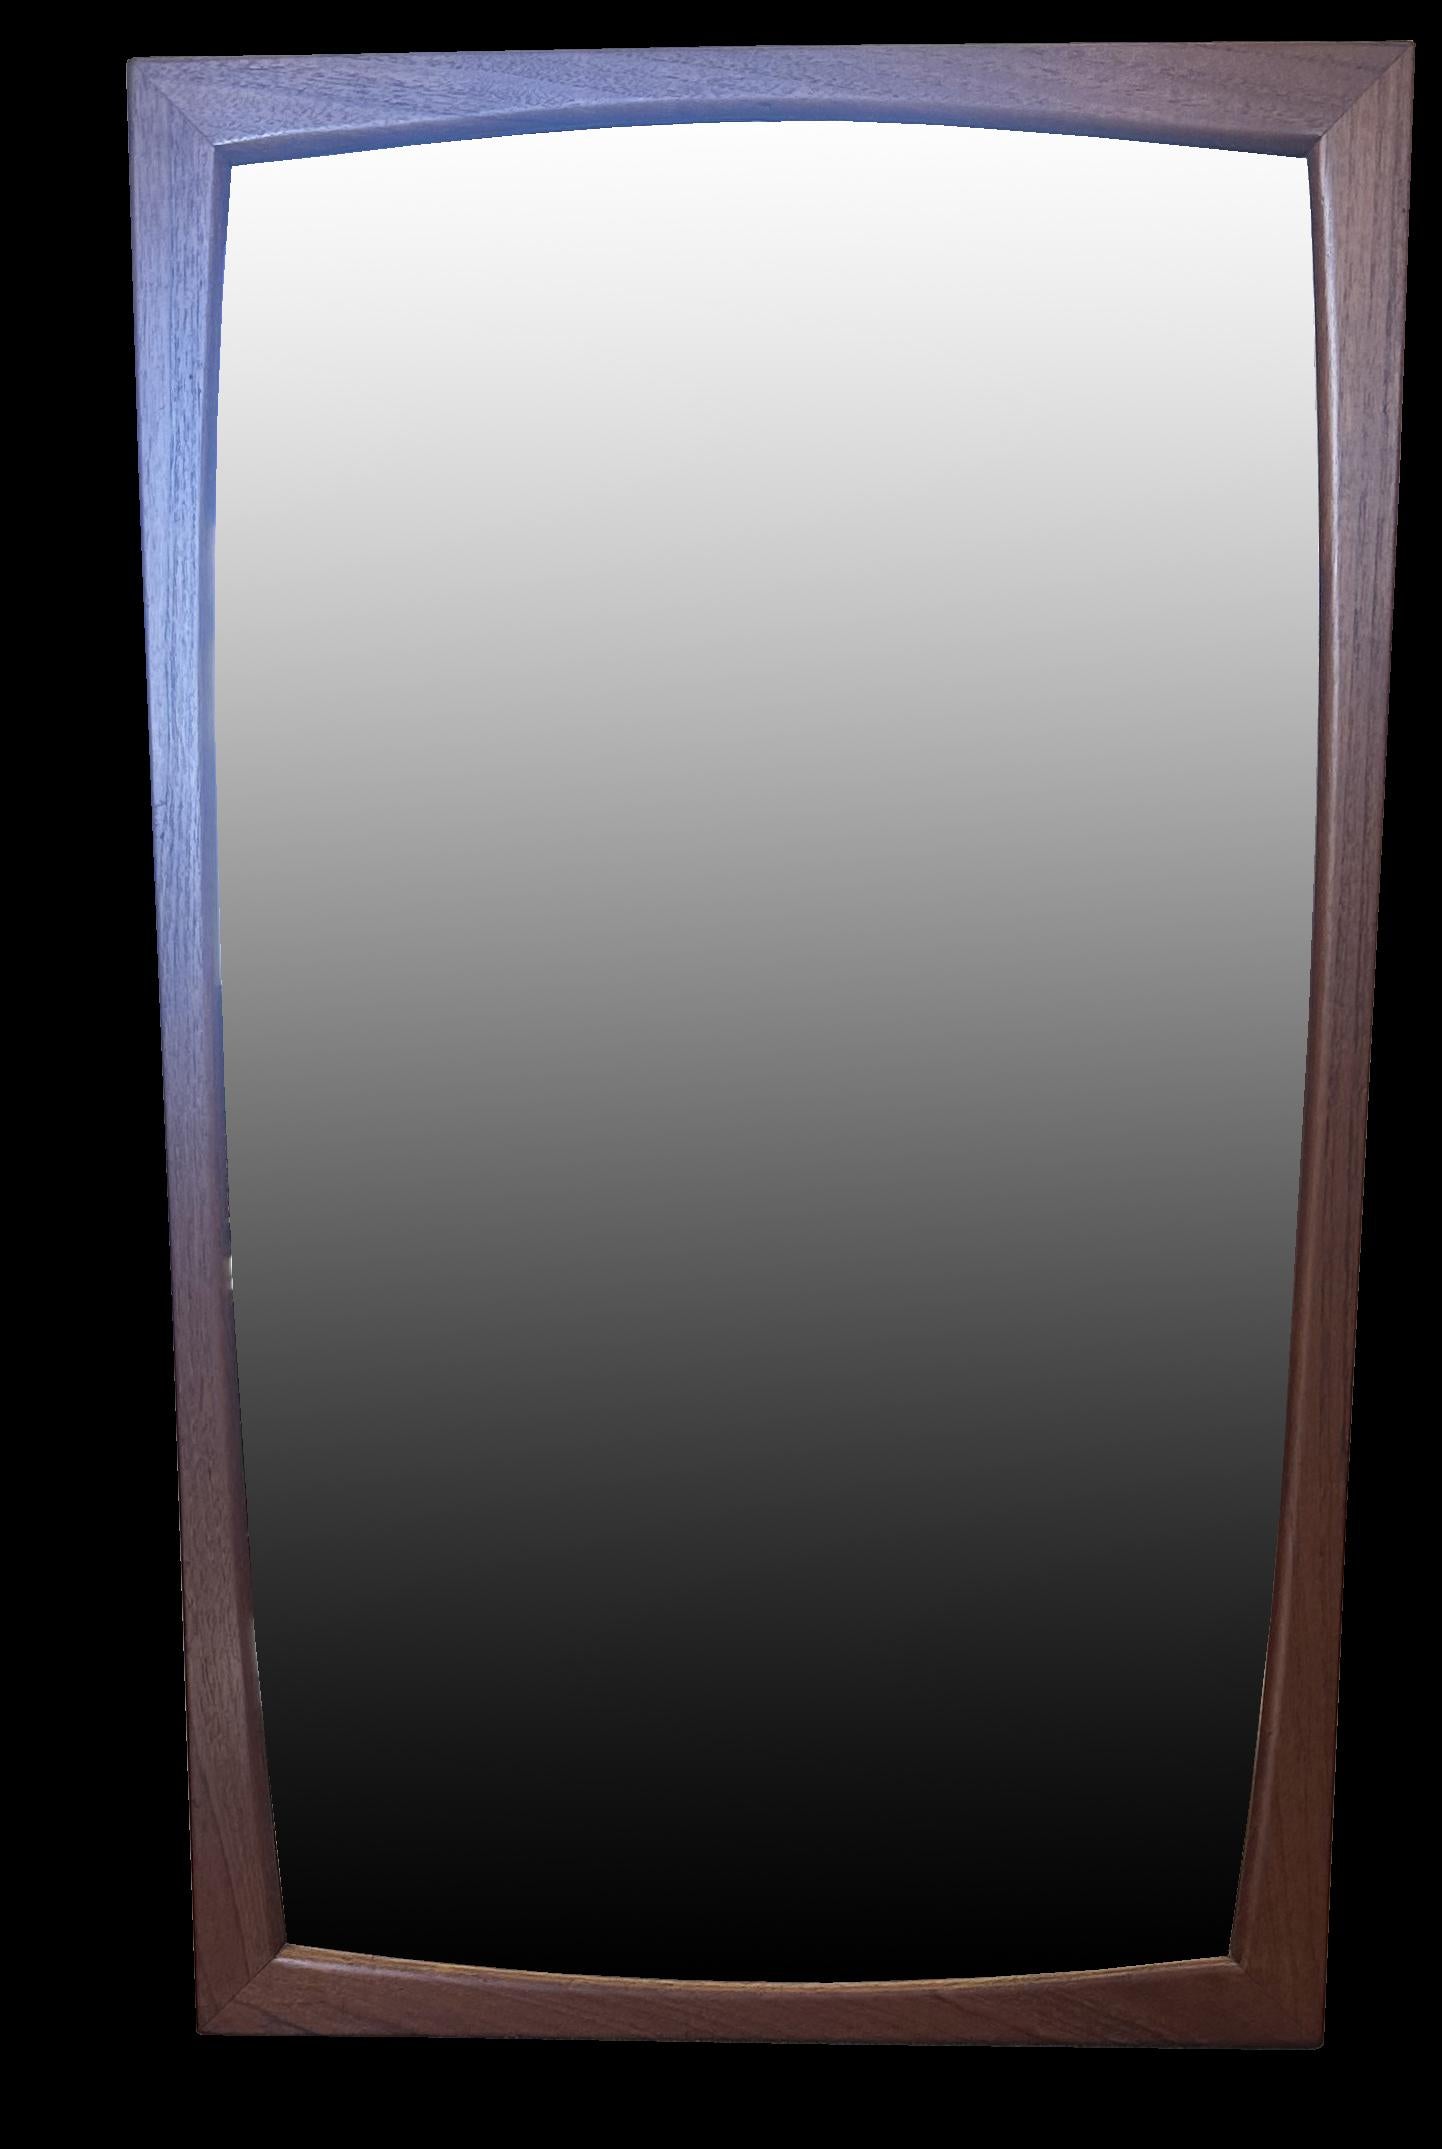 A very good solid teak wall mirror in classic Scandy Modern style,the frame shaped on all sides and with original glass mirror plate, with the model and maker stamped on the rear.